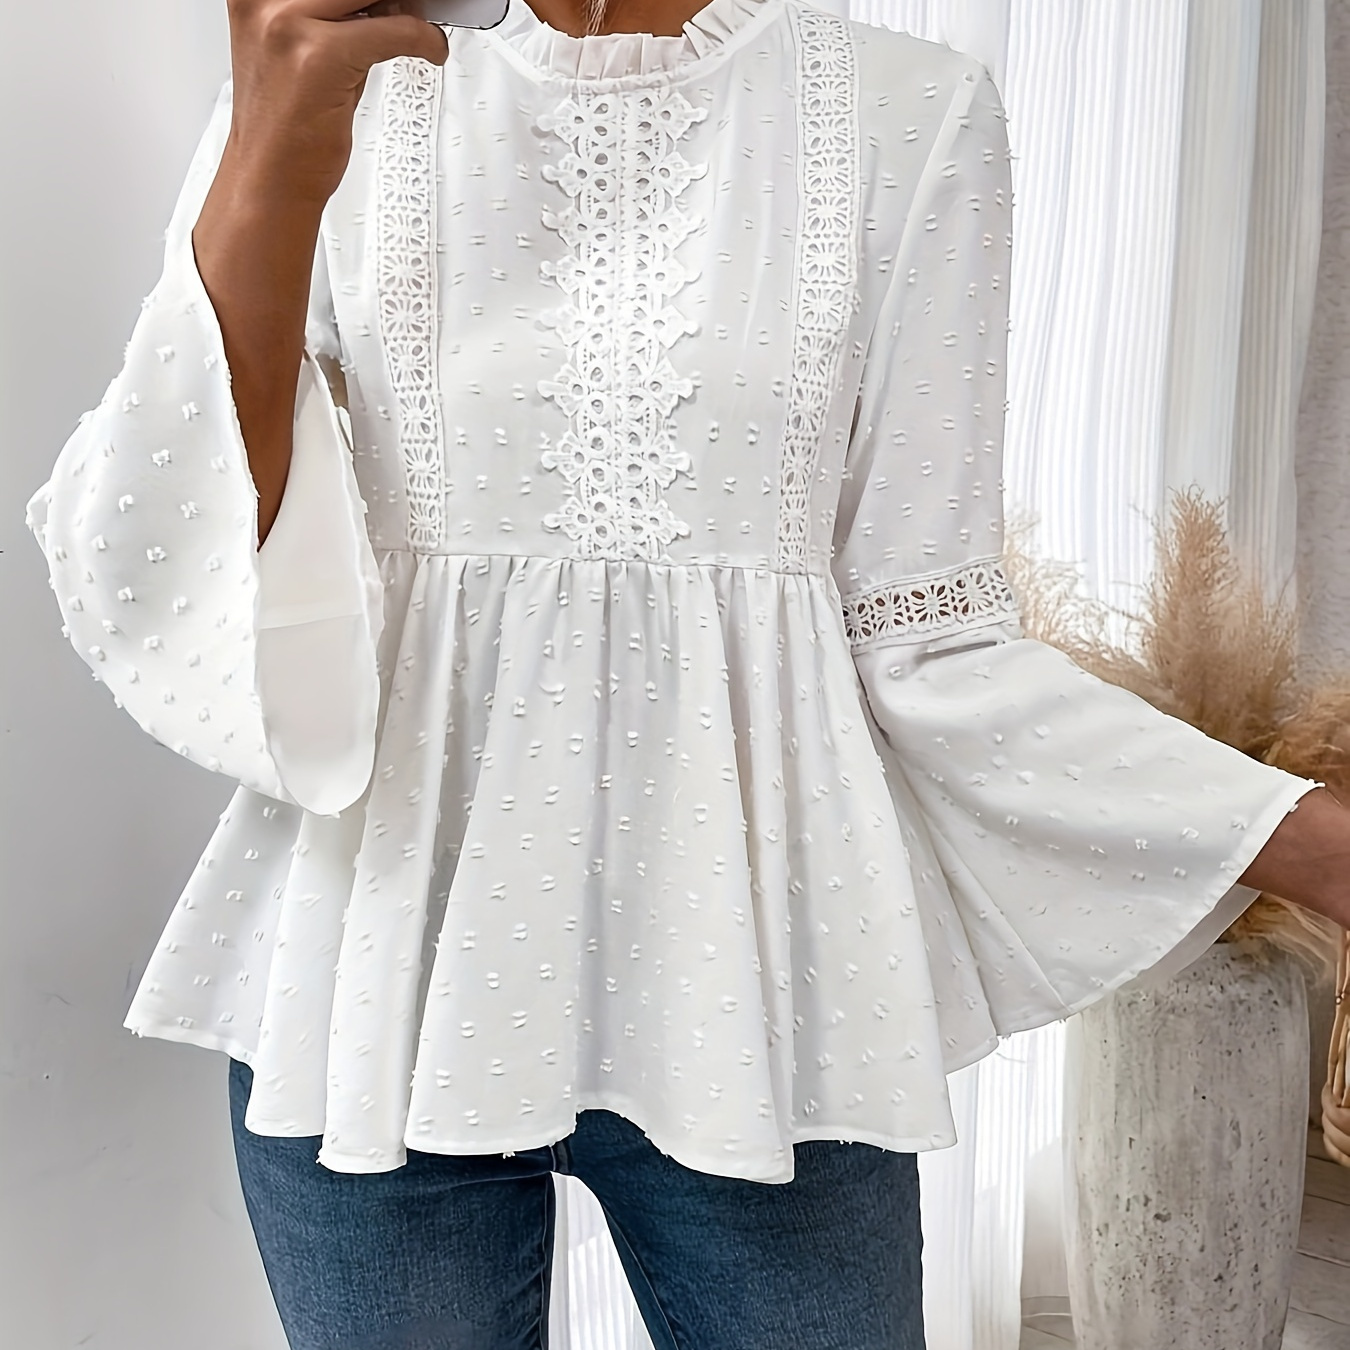 

Swiss Dot Ruffle Trim Aline Blouse, Elegant Lace Splicing Flare Sleeve Blouse For Spring & Fall, Women's Clothing Wedding Holiday Vacation